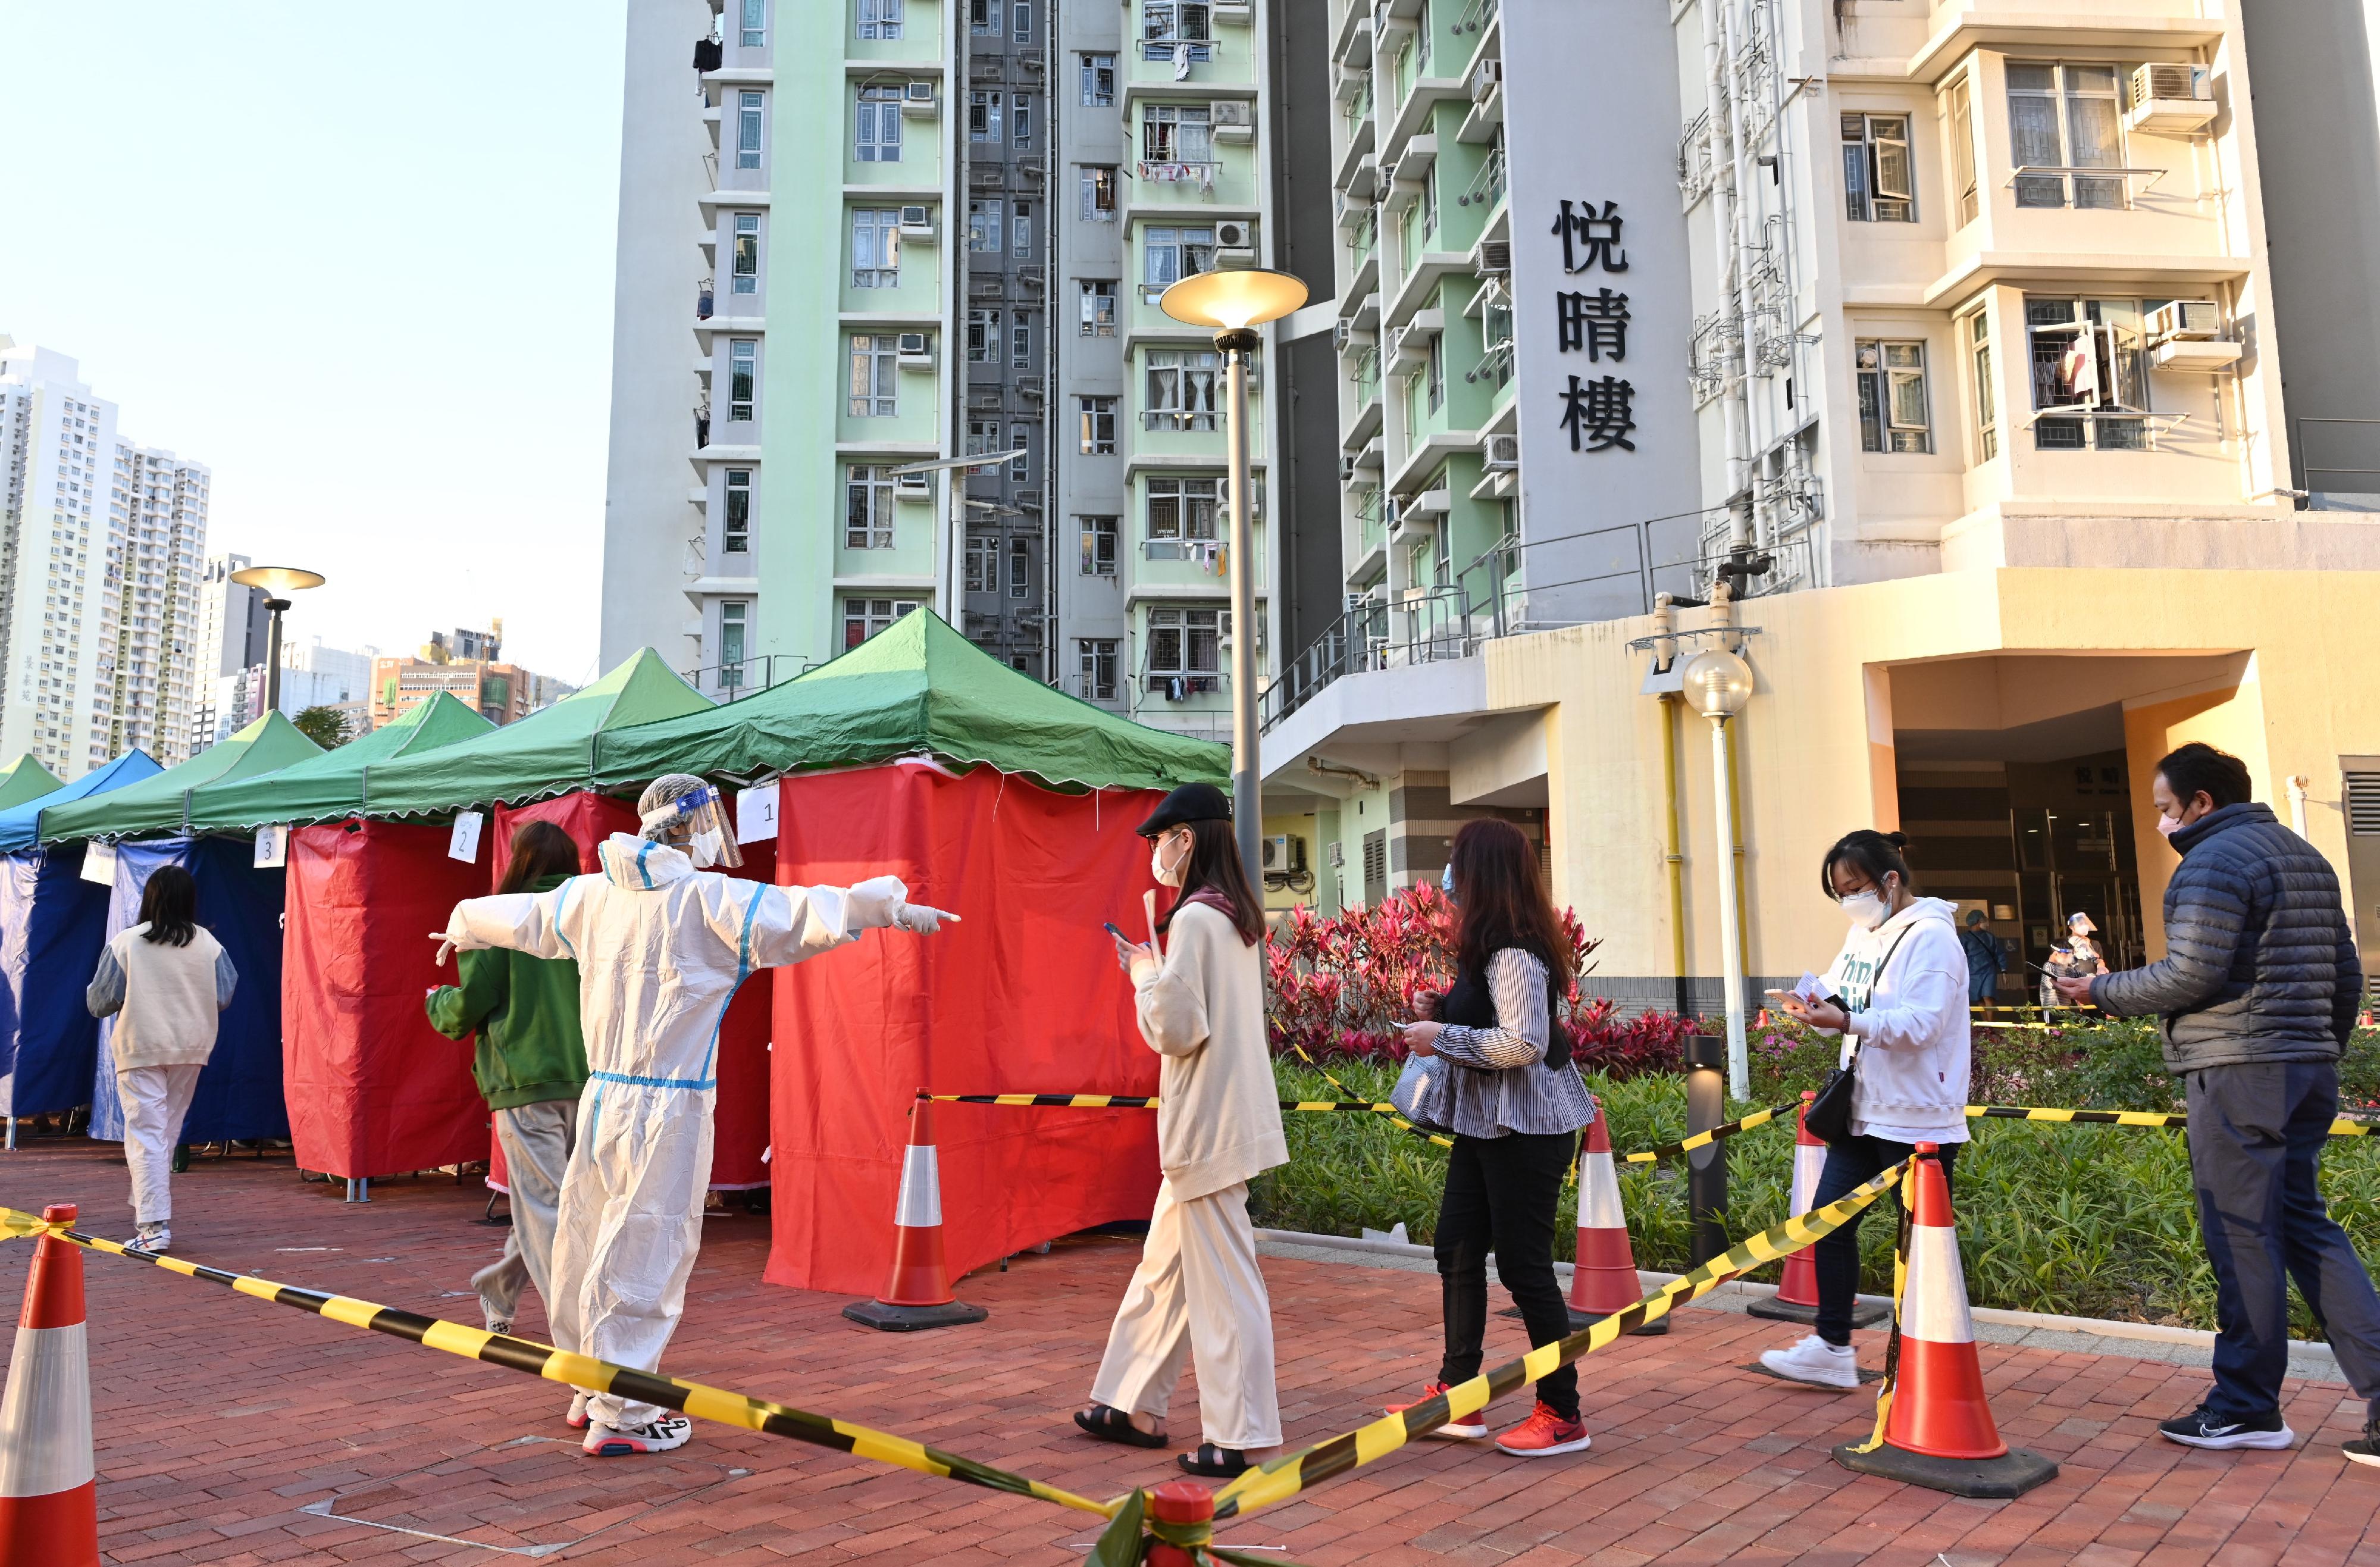 The Trade and Industry Department (TID) yesterday (March 7) conducted a "restriction-testing declaration" operation in the "restricted area" at Yuet Ching House, Kai Ching Estate, Kowloon City. Photo shows TID staff arranging for persons subject to compulsory testing to undergo testing.